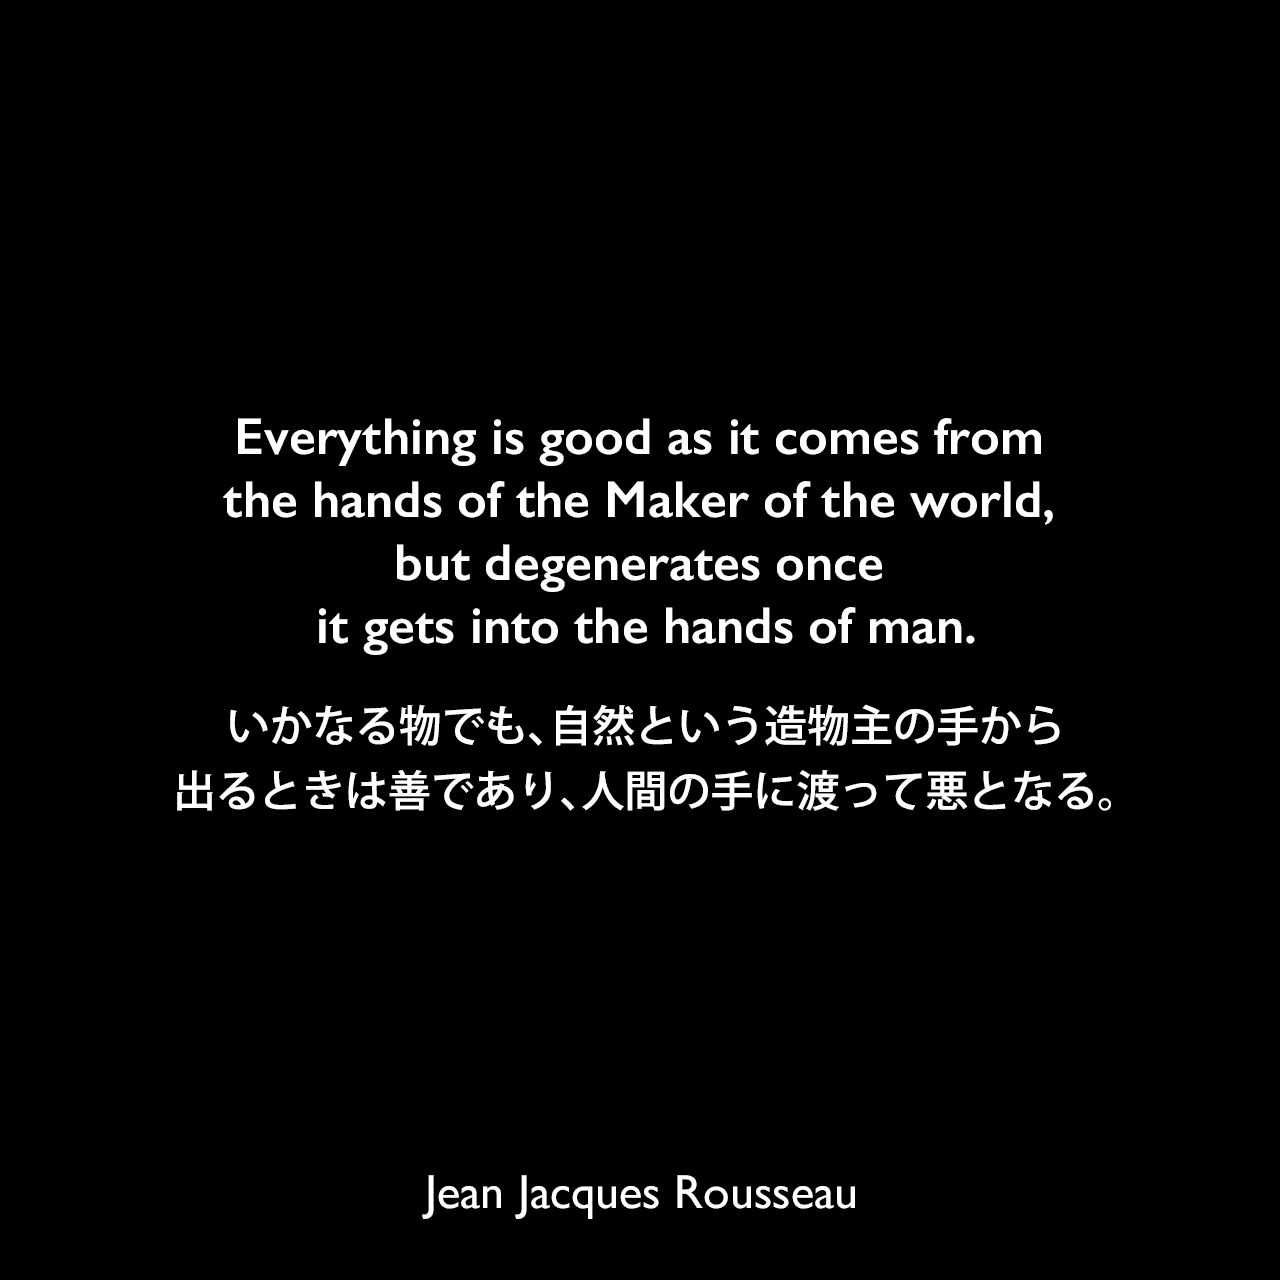 Everything is good as it comes from the hands of the Maker of the world, but degenerates once it gets into the hands of man.いかなる物でも、自然という造物主の手から出るときは善であり、人間の手に渡って悪となる。Jean Jacques Rousseau